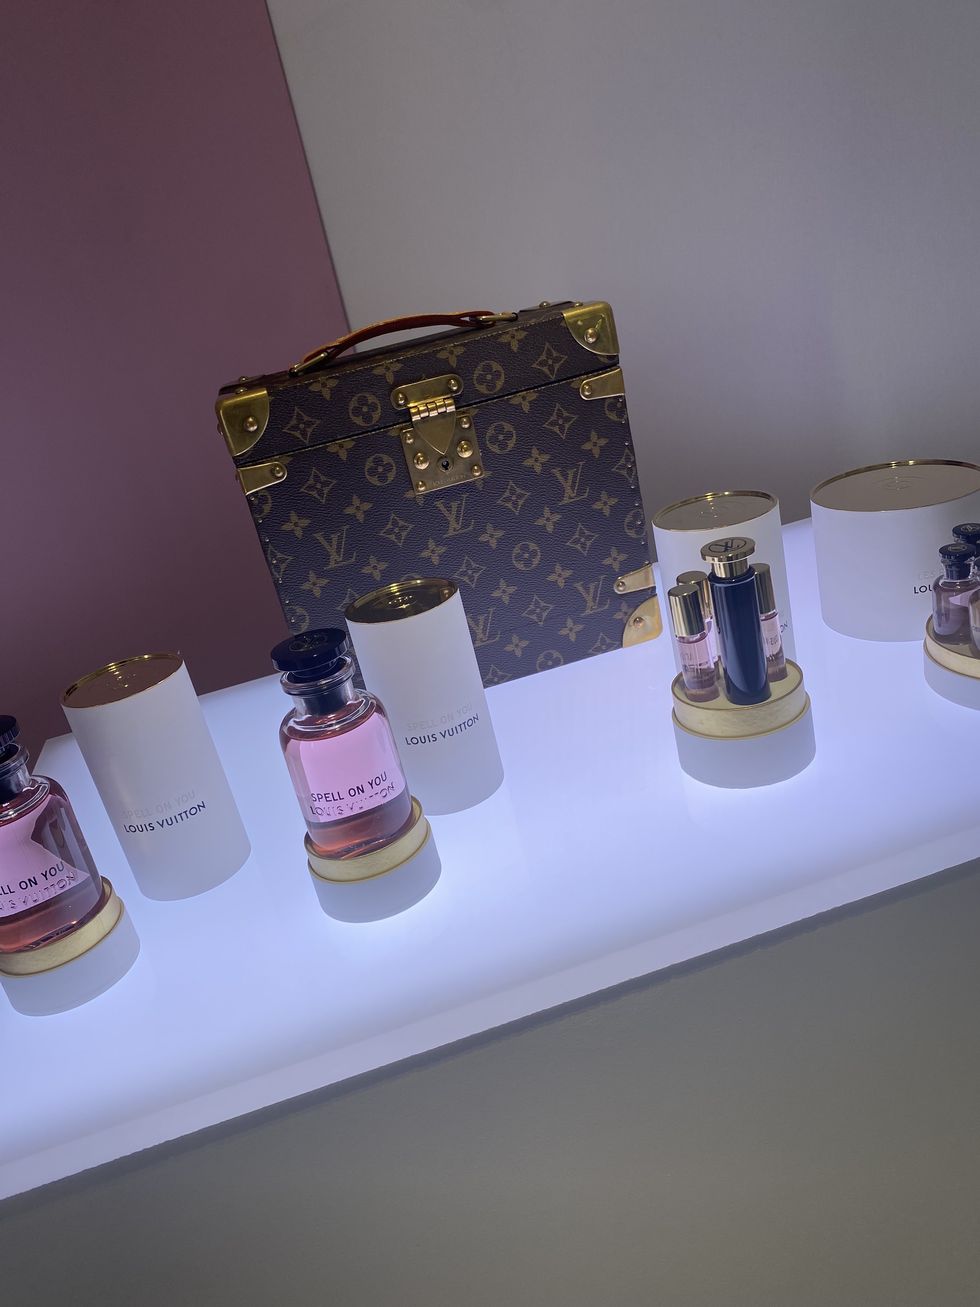 Louis Vuitton Spell On You fragrance campaign,celebrity,fashion  Louis  vuitton fragrance, Louis vuitton perfume, Fragrance campaign